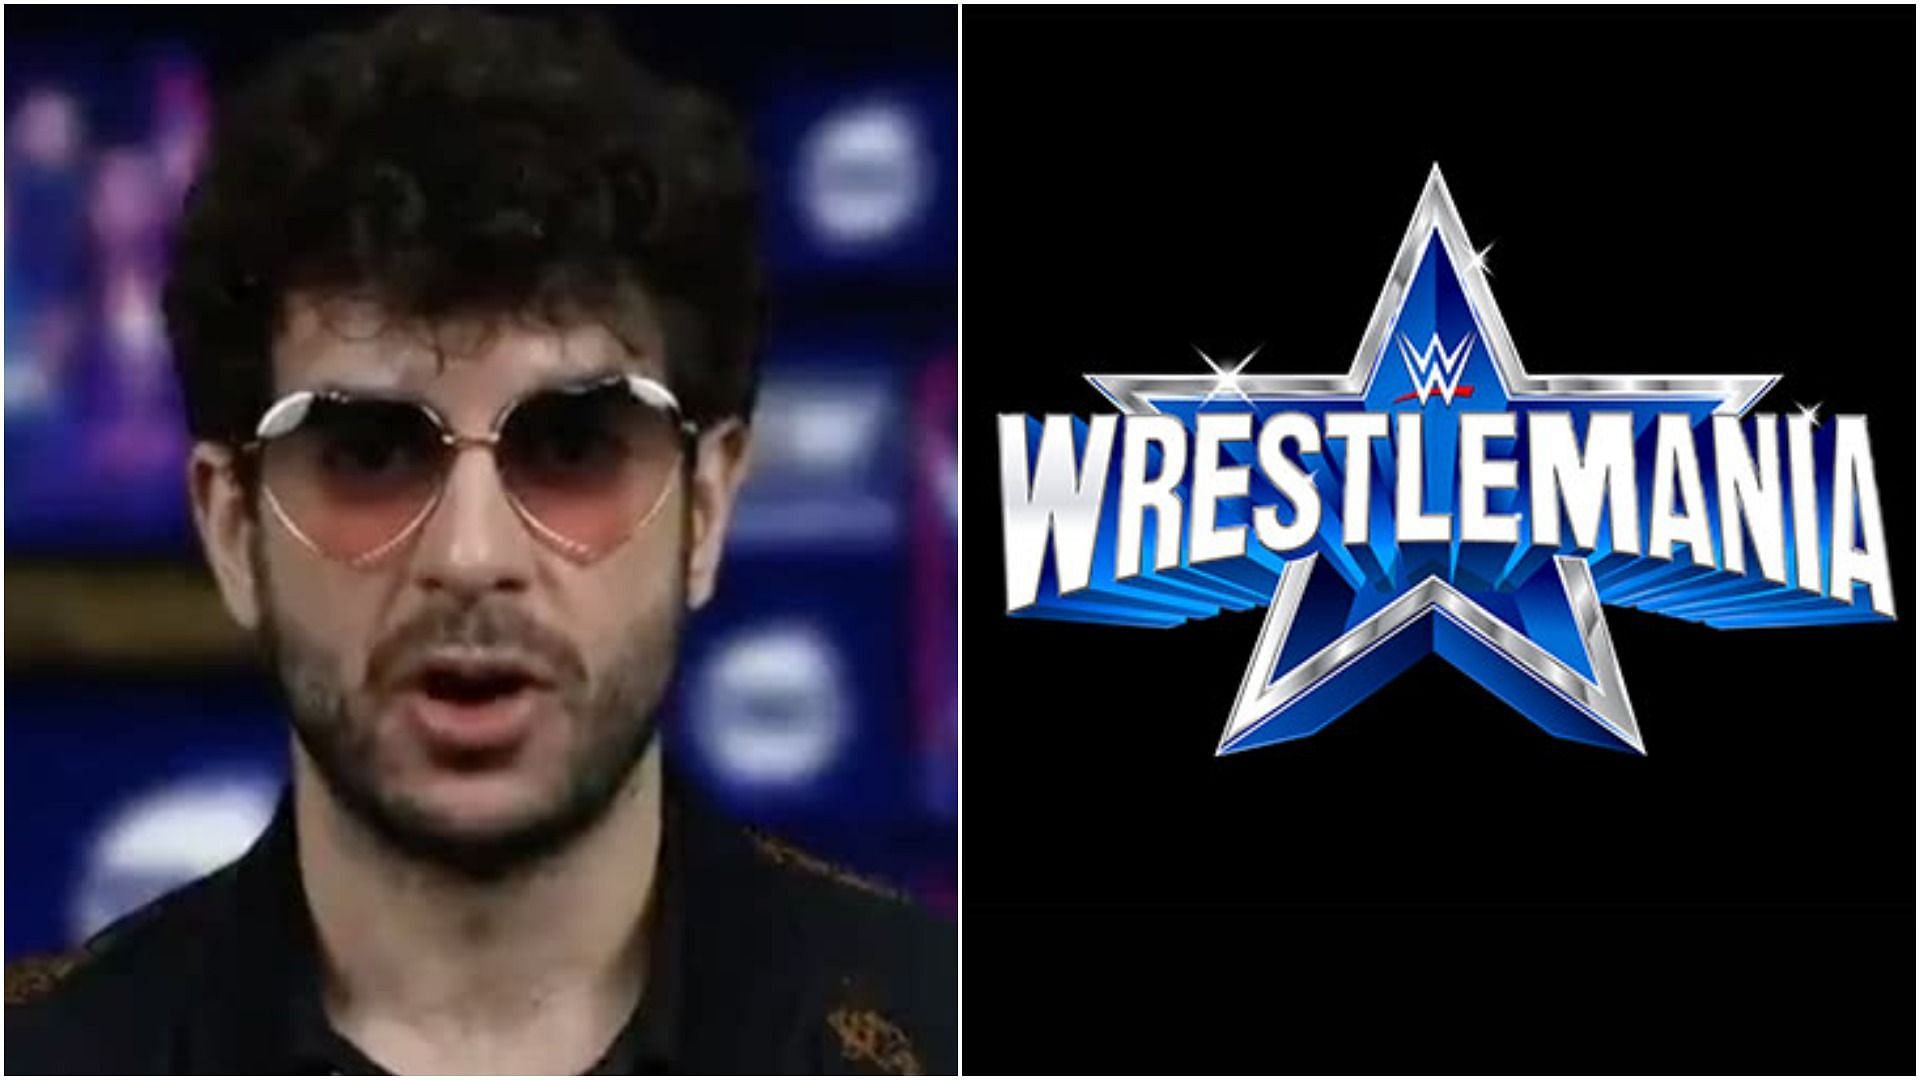 Tony Khan will run ROH Supercard of Honor over WrestleMania weekend